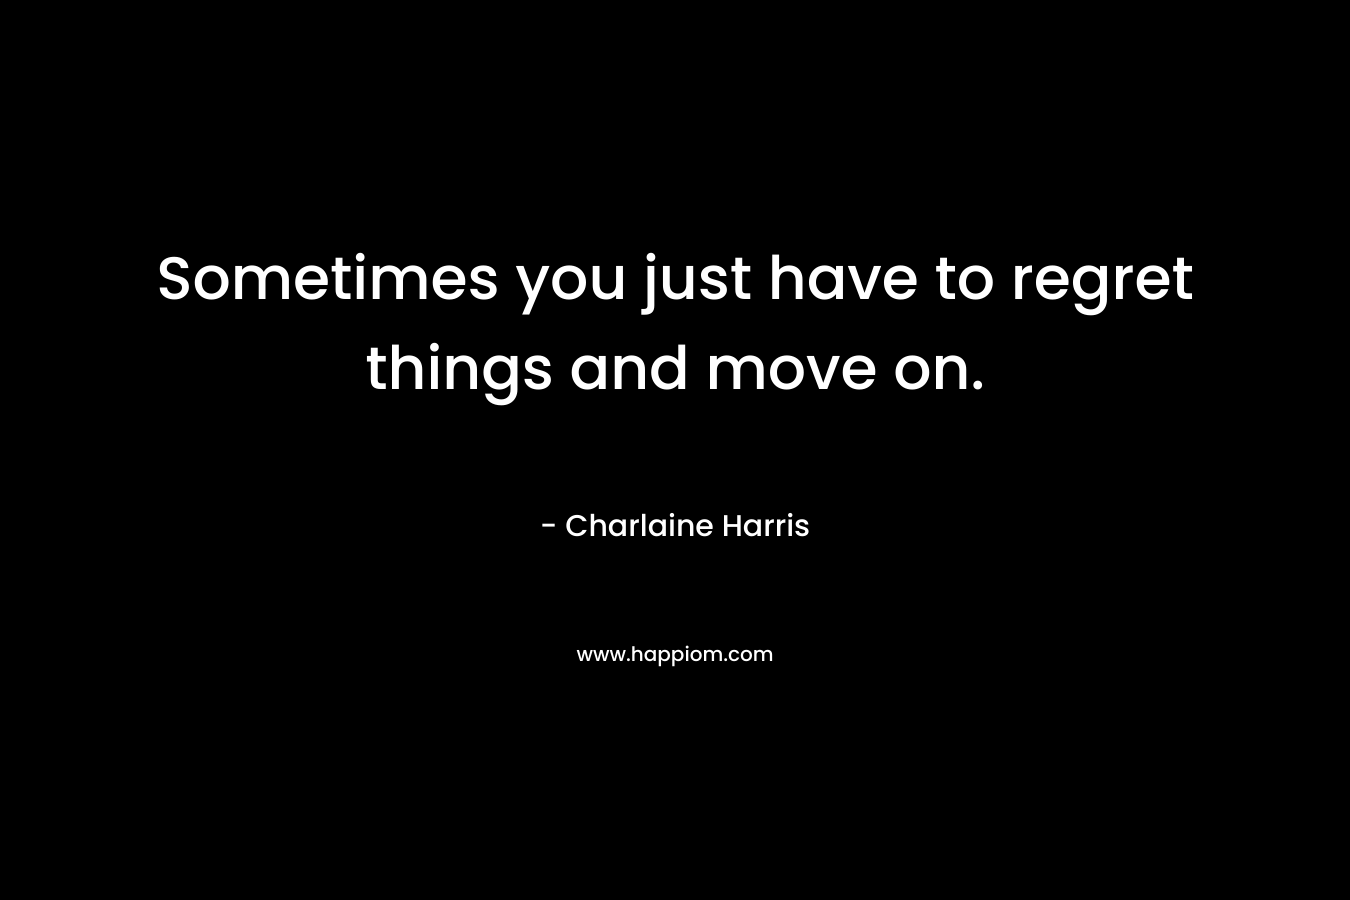 Sometimes you just have to regret things and move on.